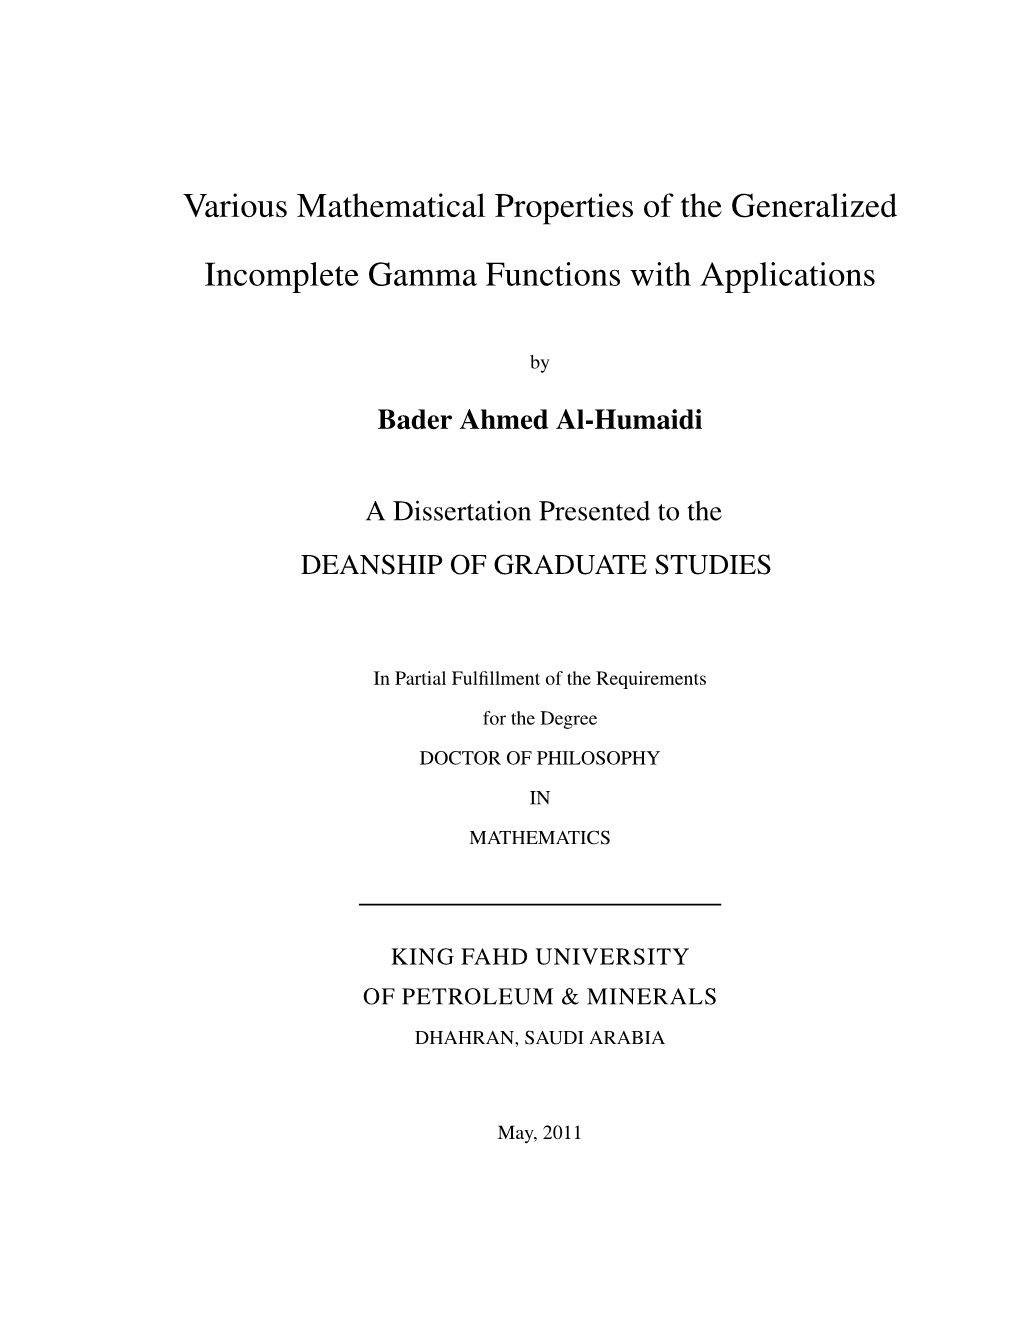 Various Mathematical Properties of the Generalized Incomplete Gamma Functions with Applications